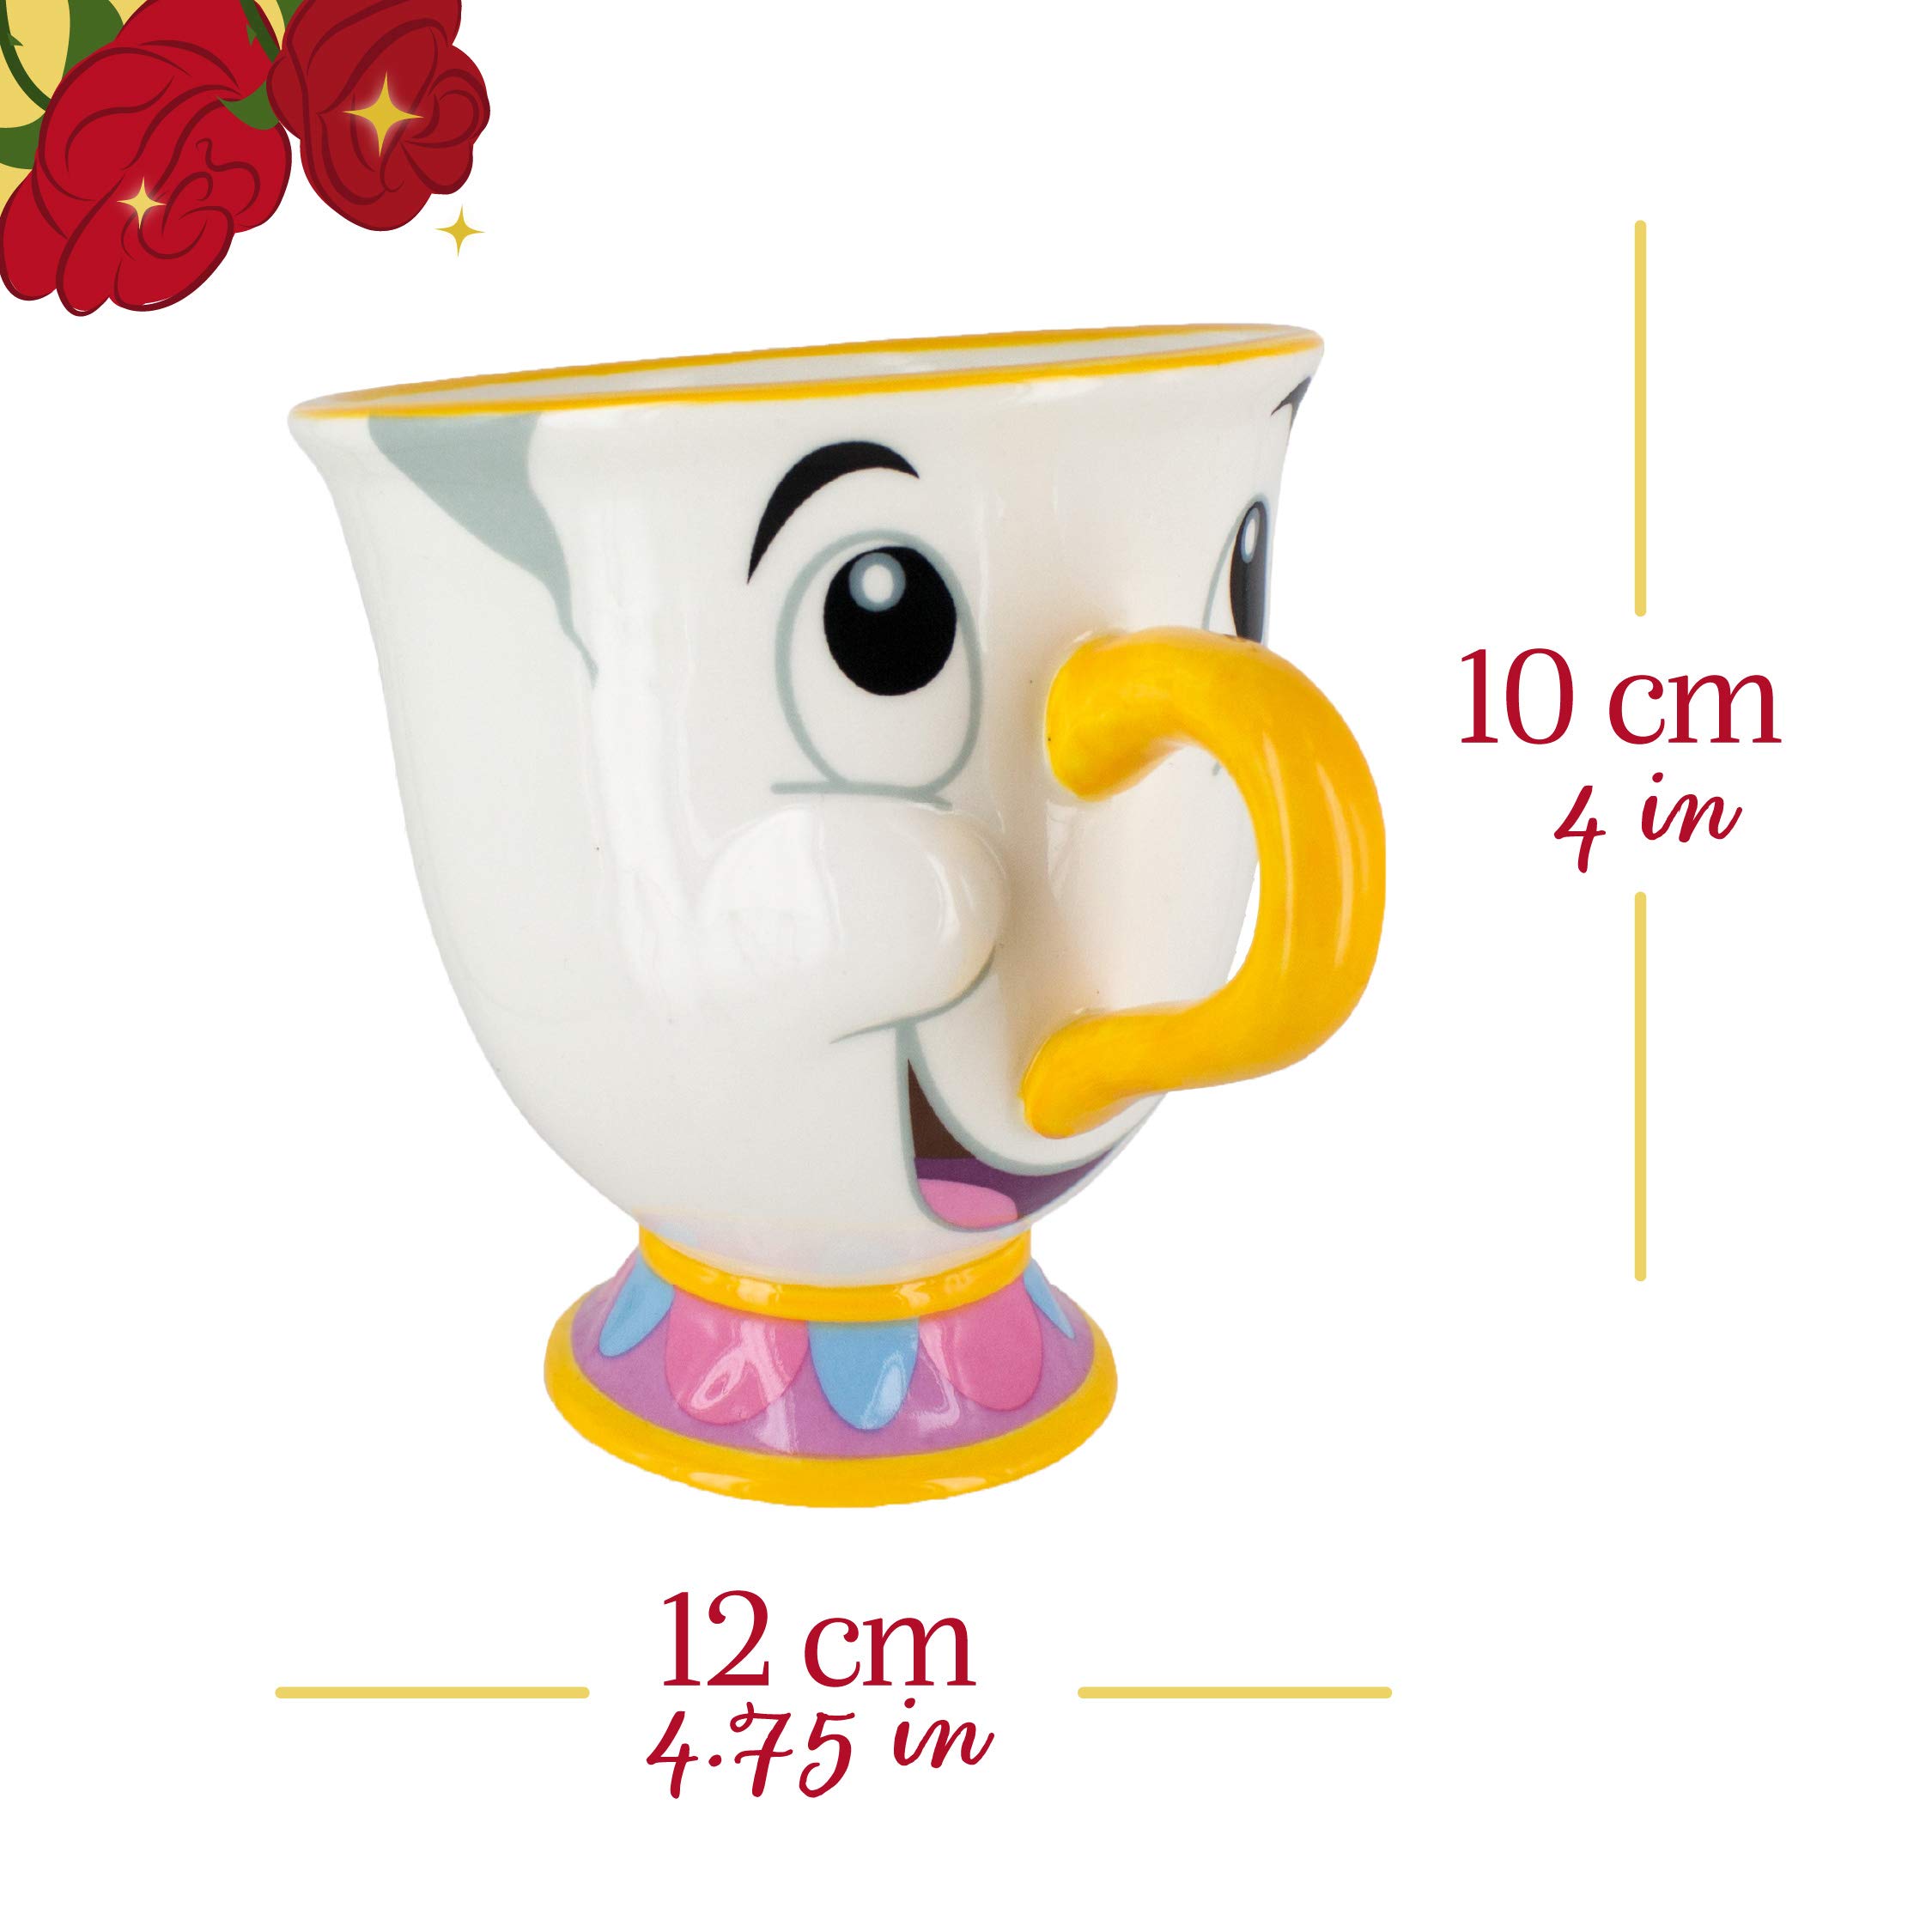 Disney Beauty and the Beast Offical Licensed Chip Tea Cup by Paladone, 9oz Ceramic Coffee Mug a Disney Princess Collectible Novelty Gift